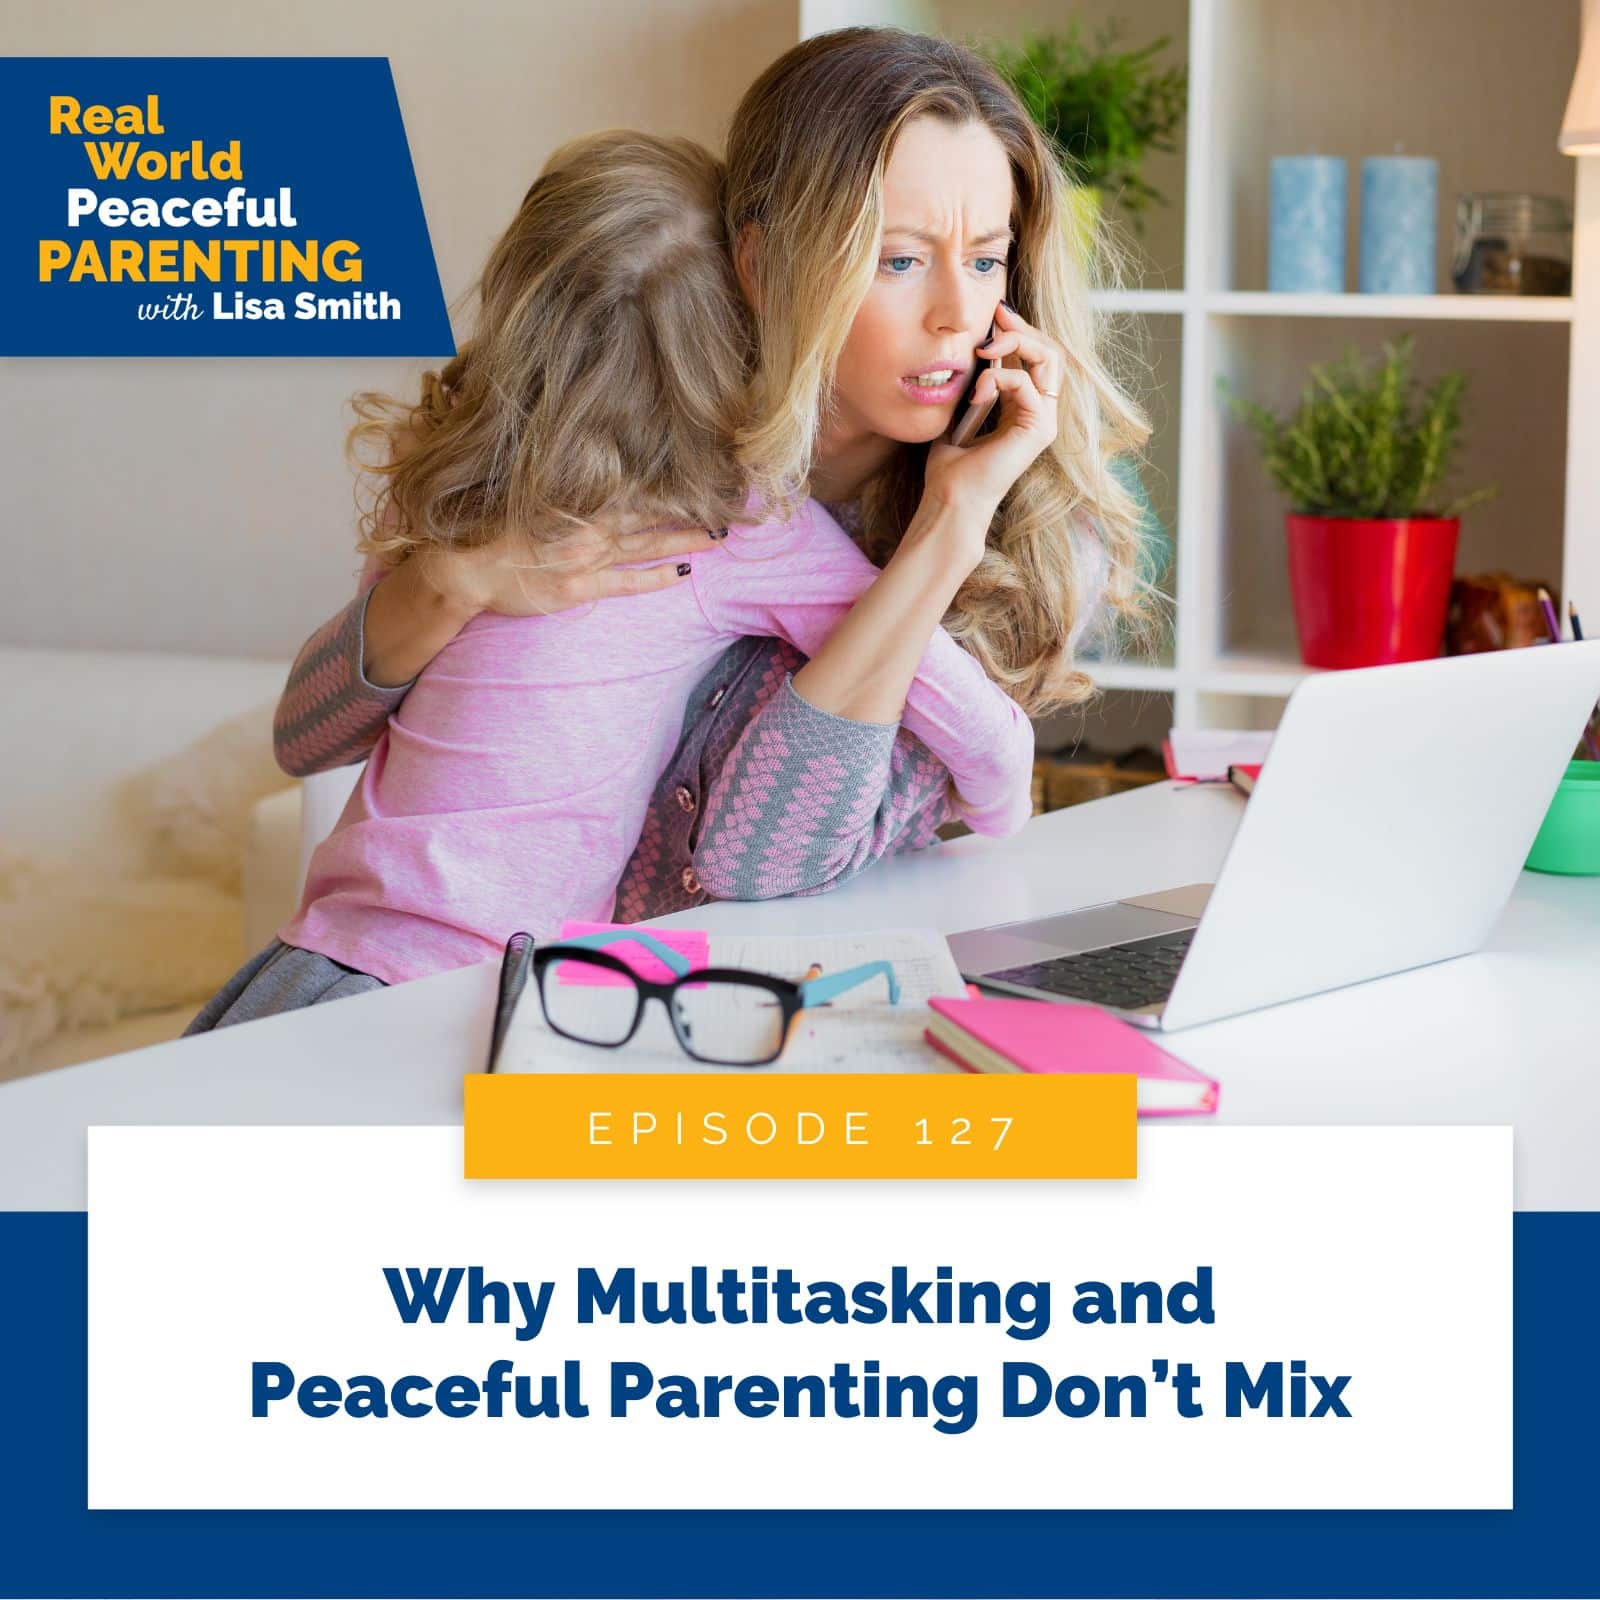 Real World Peaceful Parenting Lisa Smith | Why Multitasking and Peaceful Parenting Don’t Mix